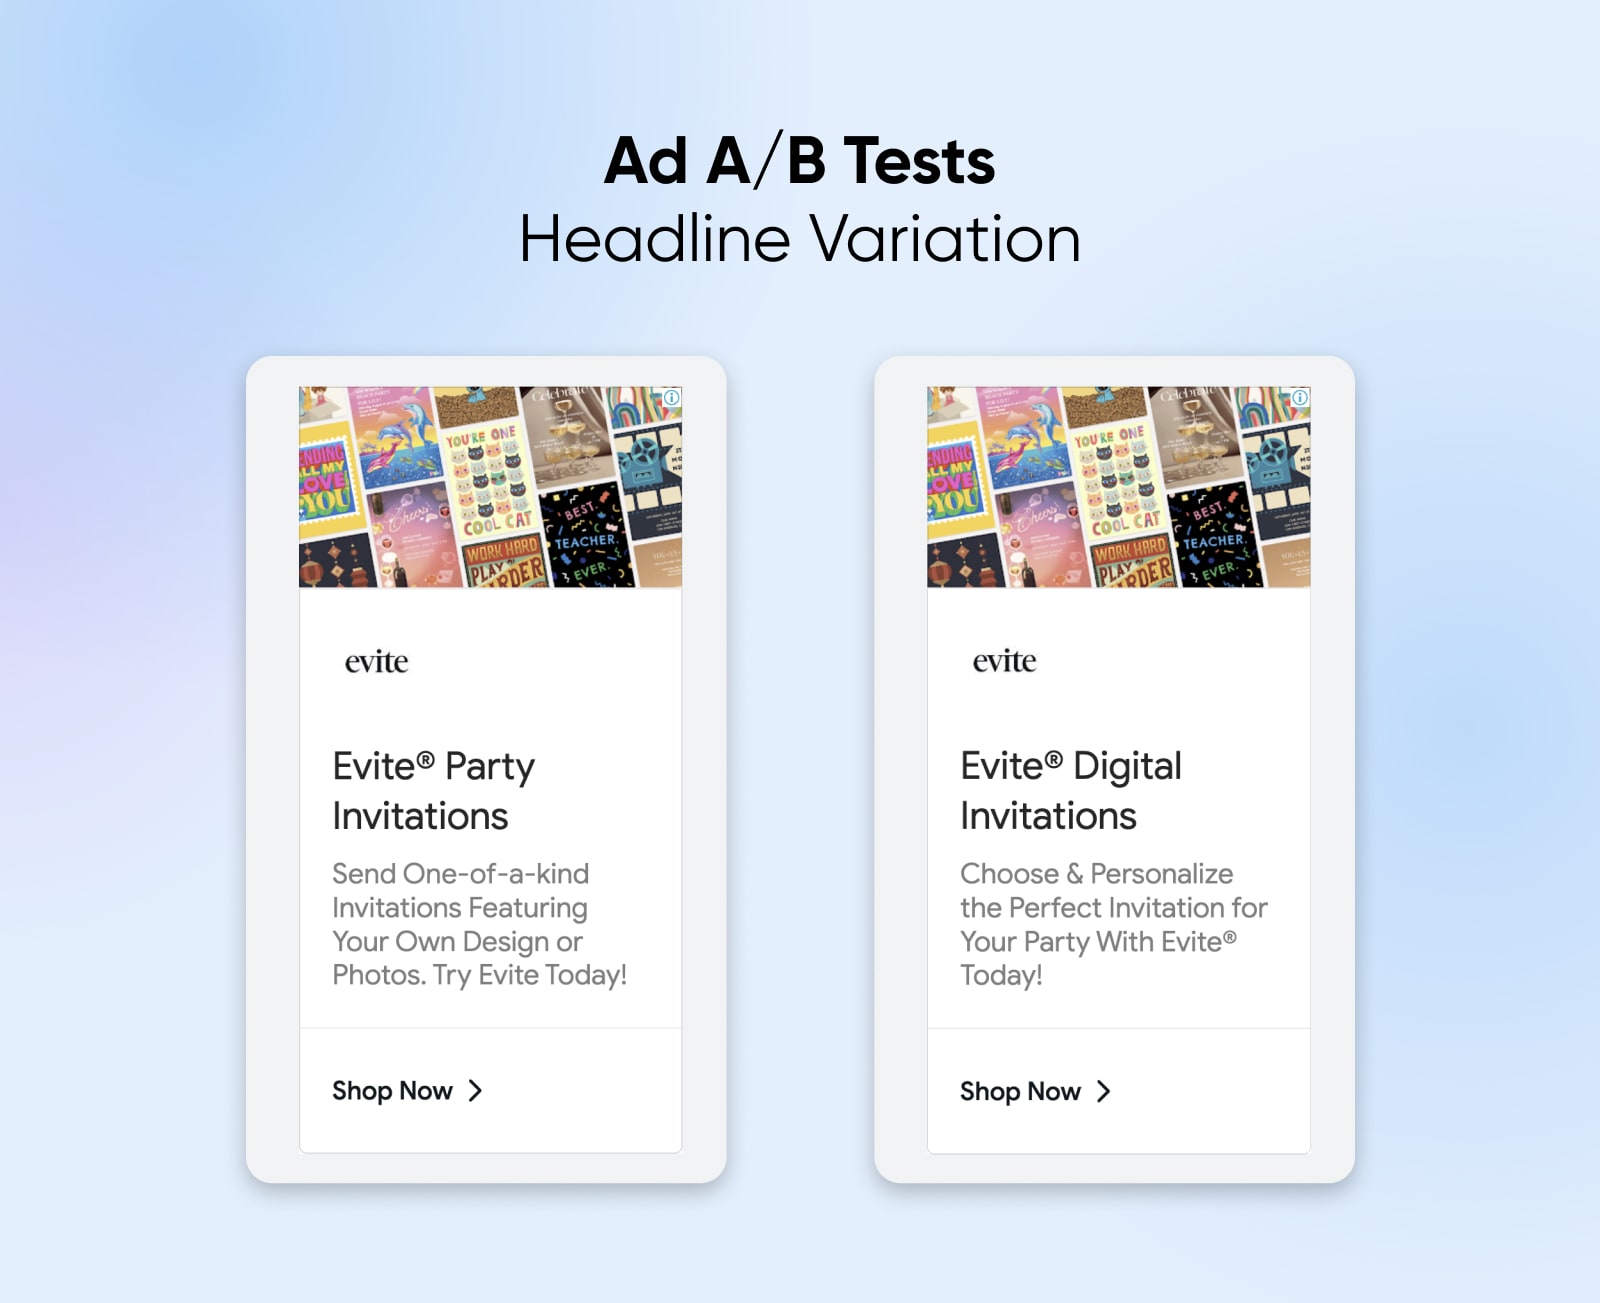 Examples of two Evite ads with different headline copy appear side-by-side against a blue background